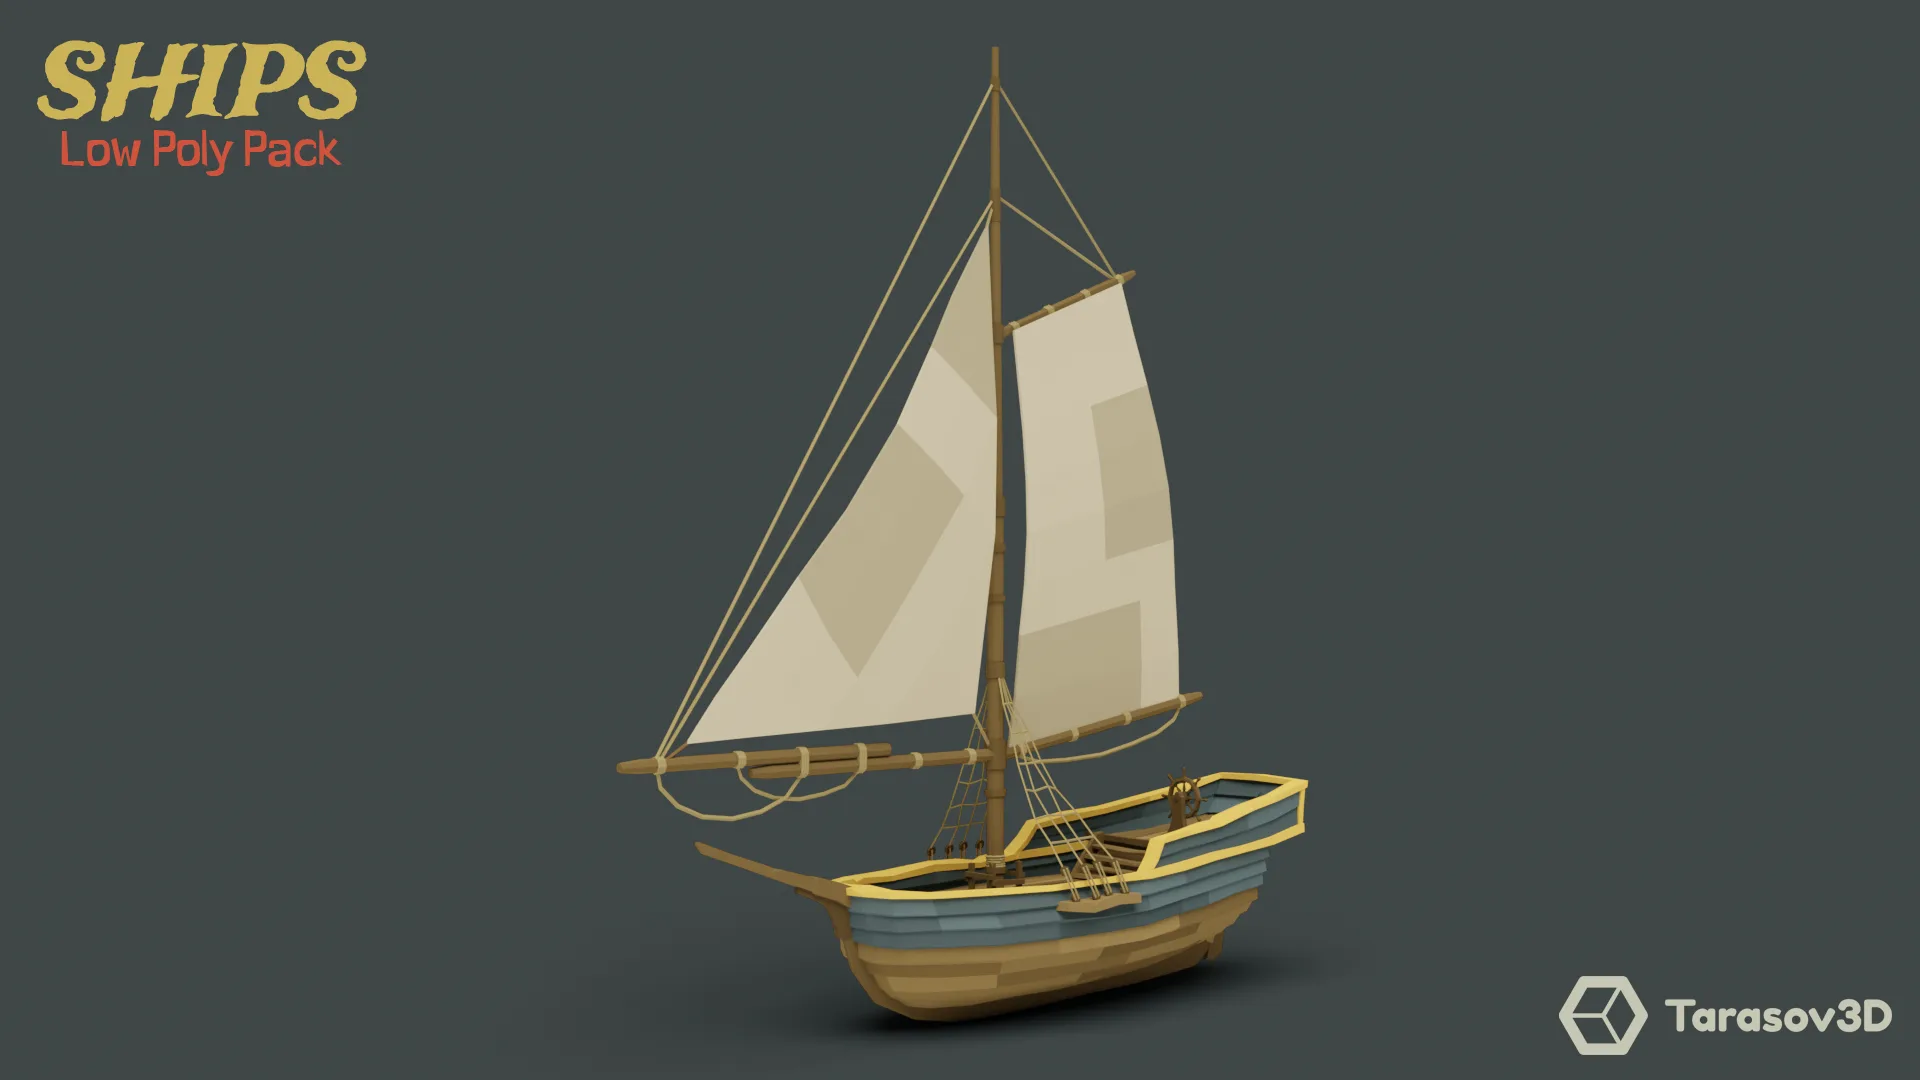 Ships Low Poly Pack